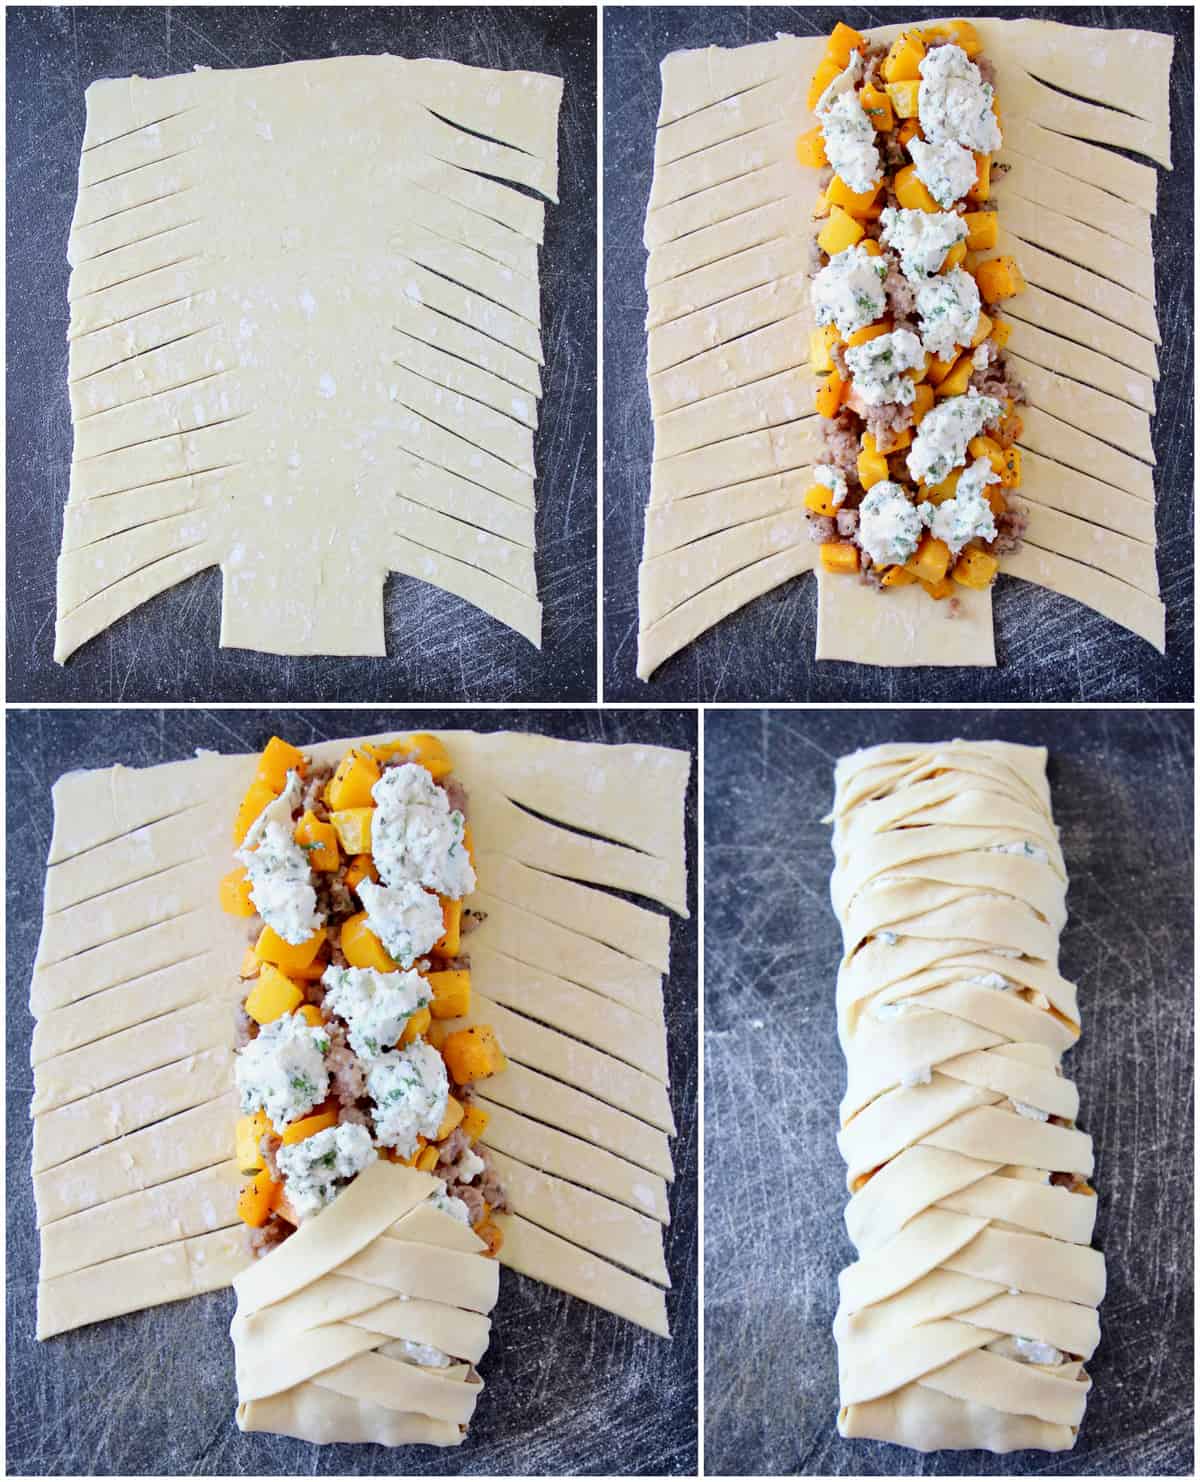 instructional images for how to make a puff pastry braid